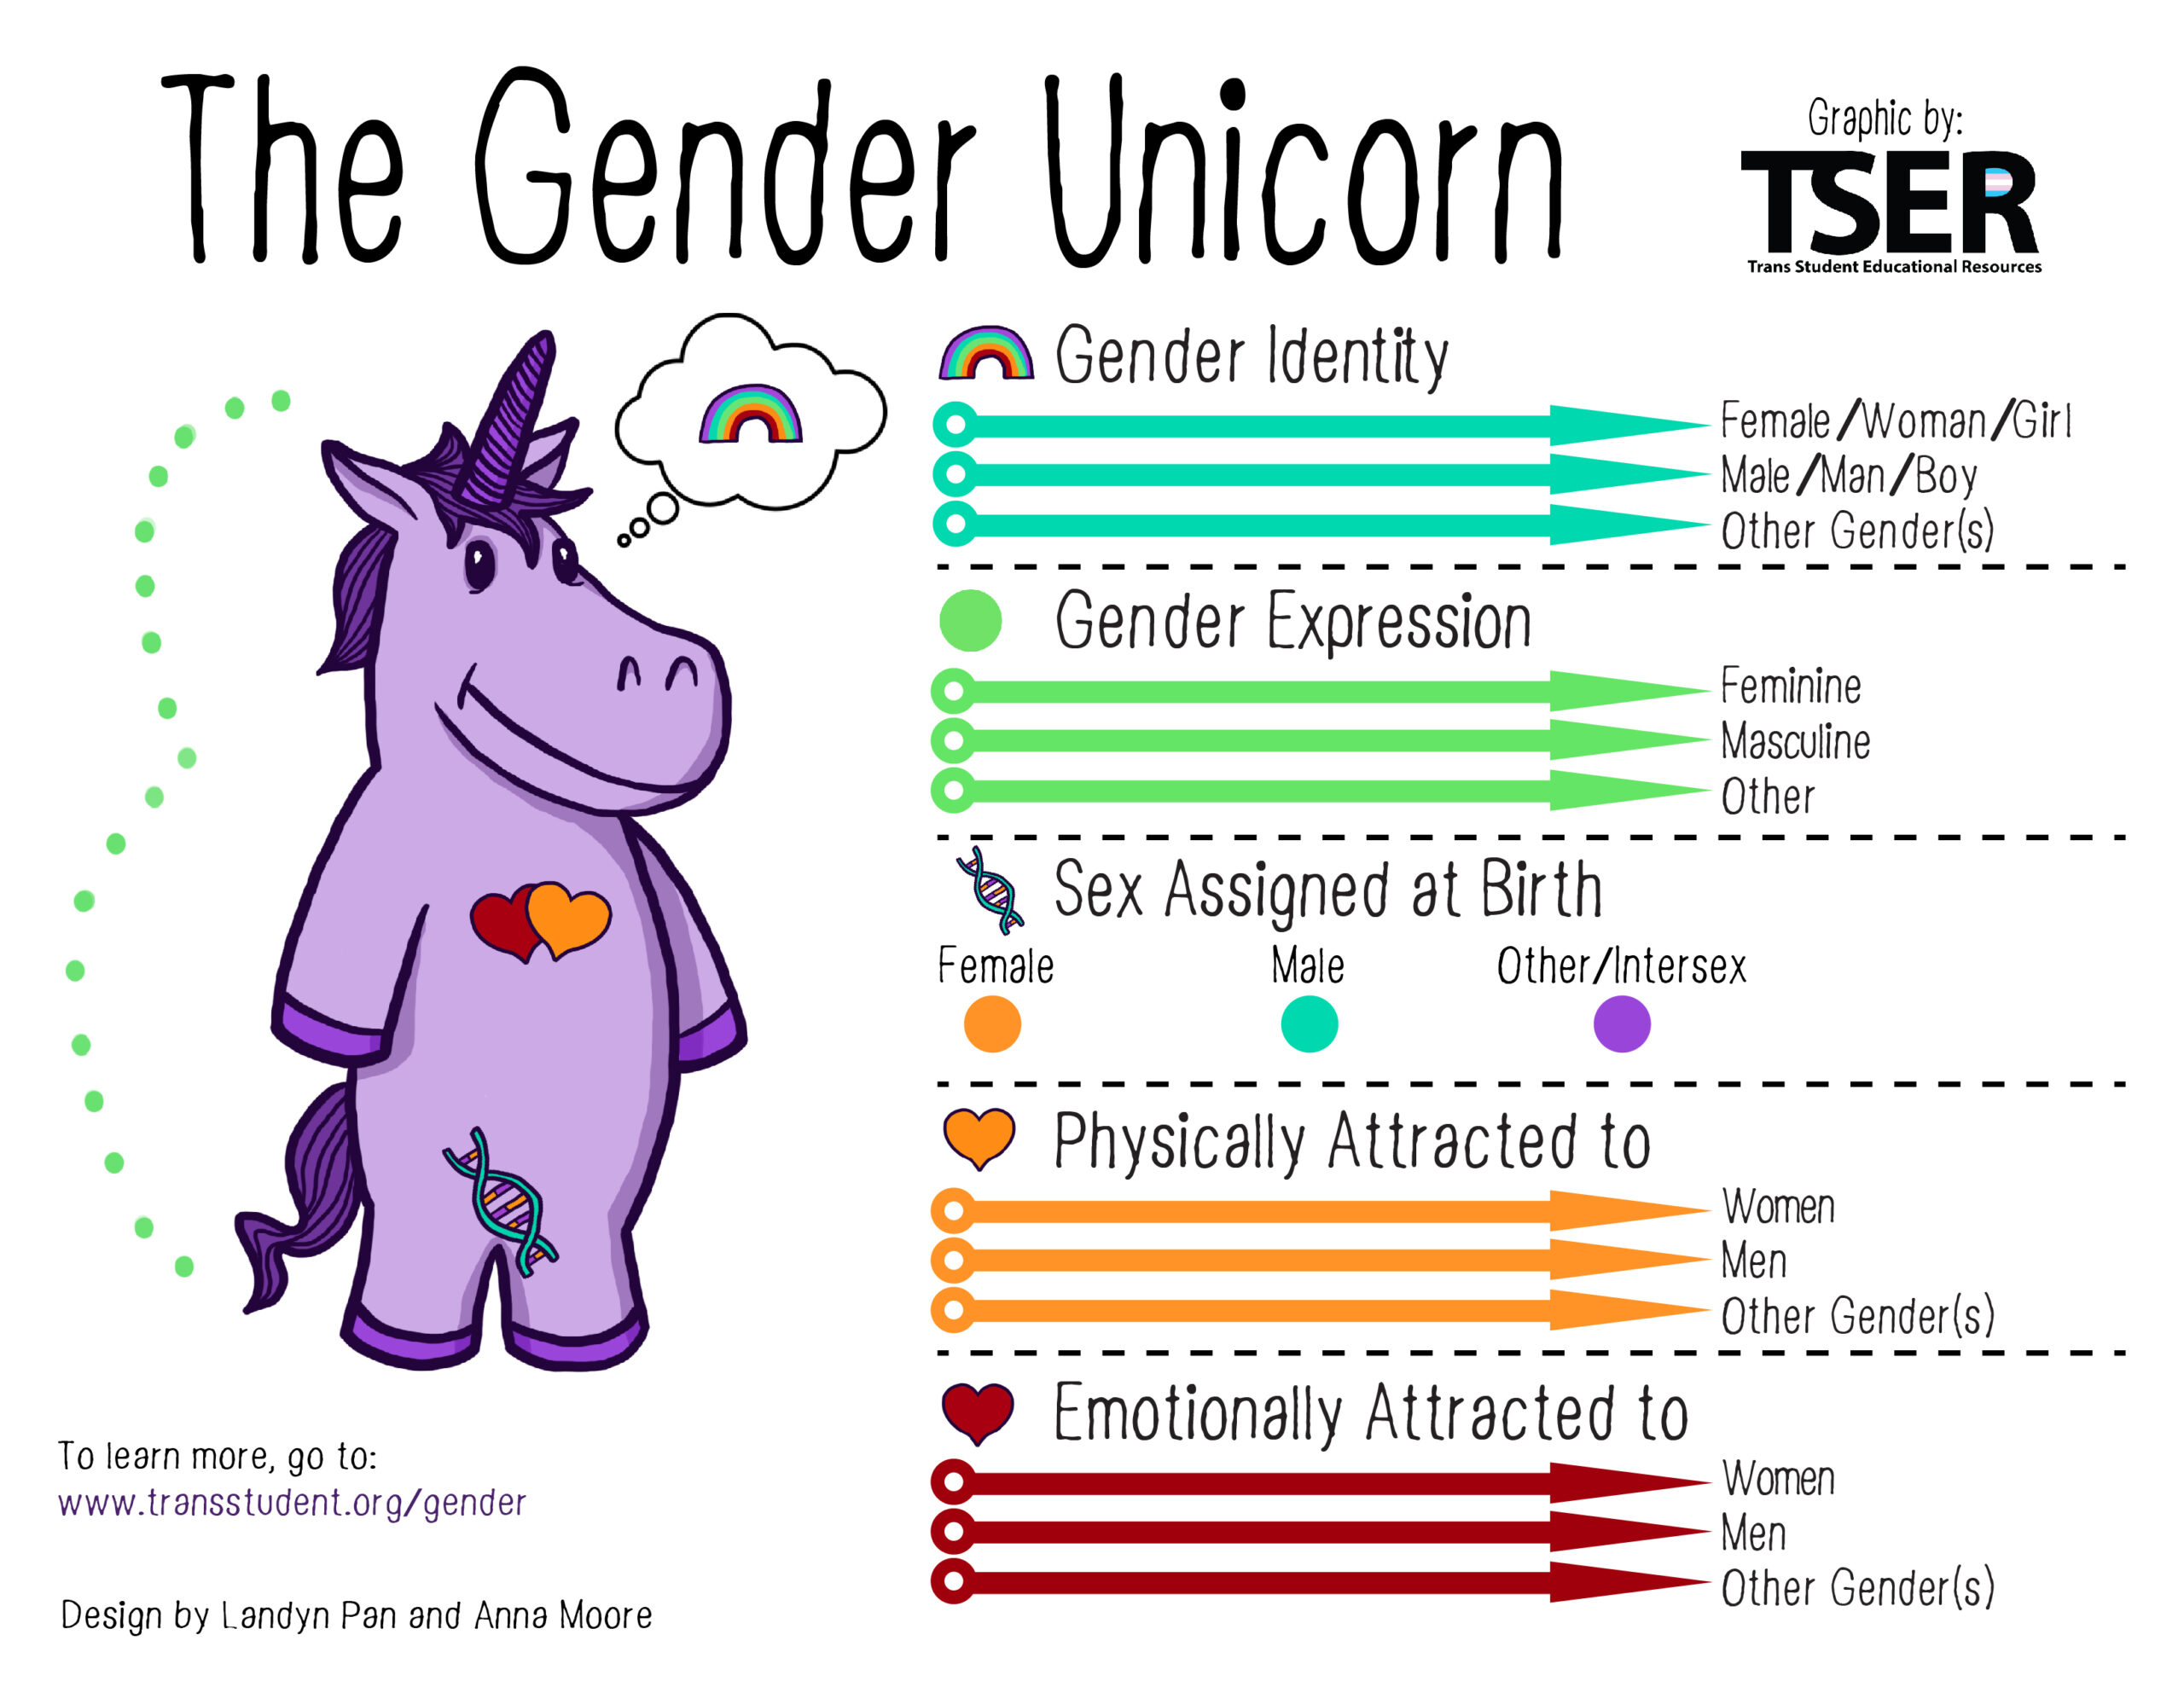 From Trans Student Educational Resources